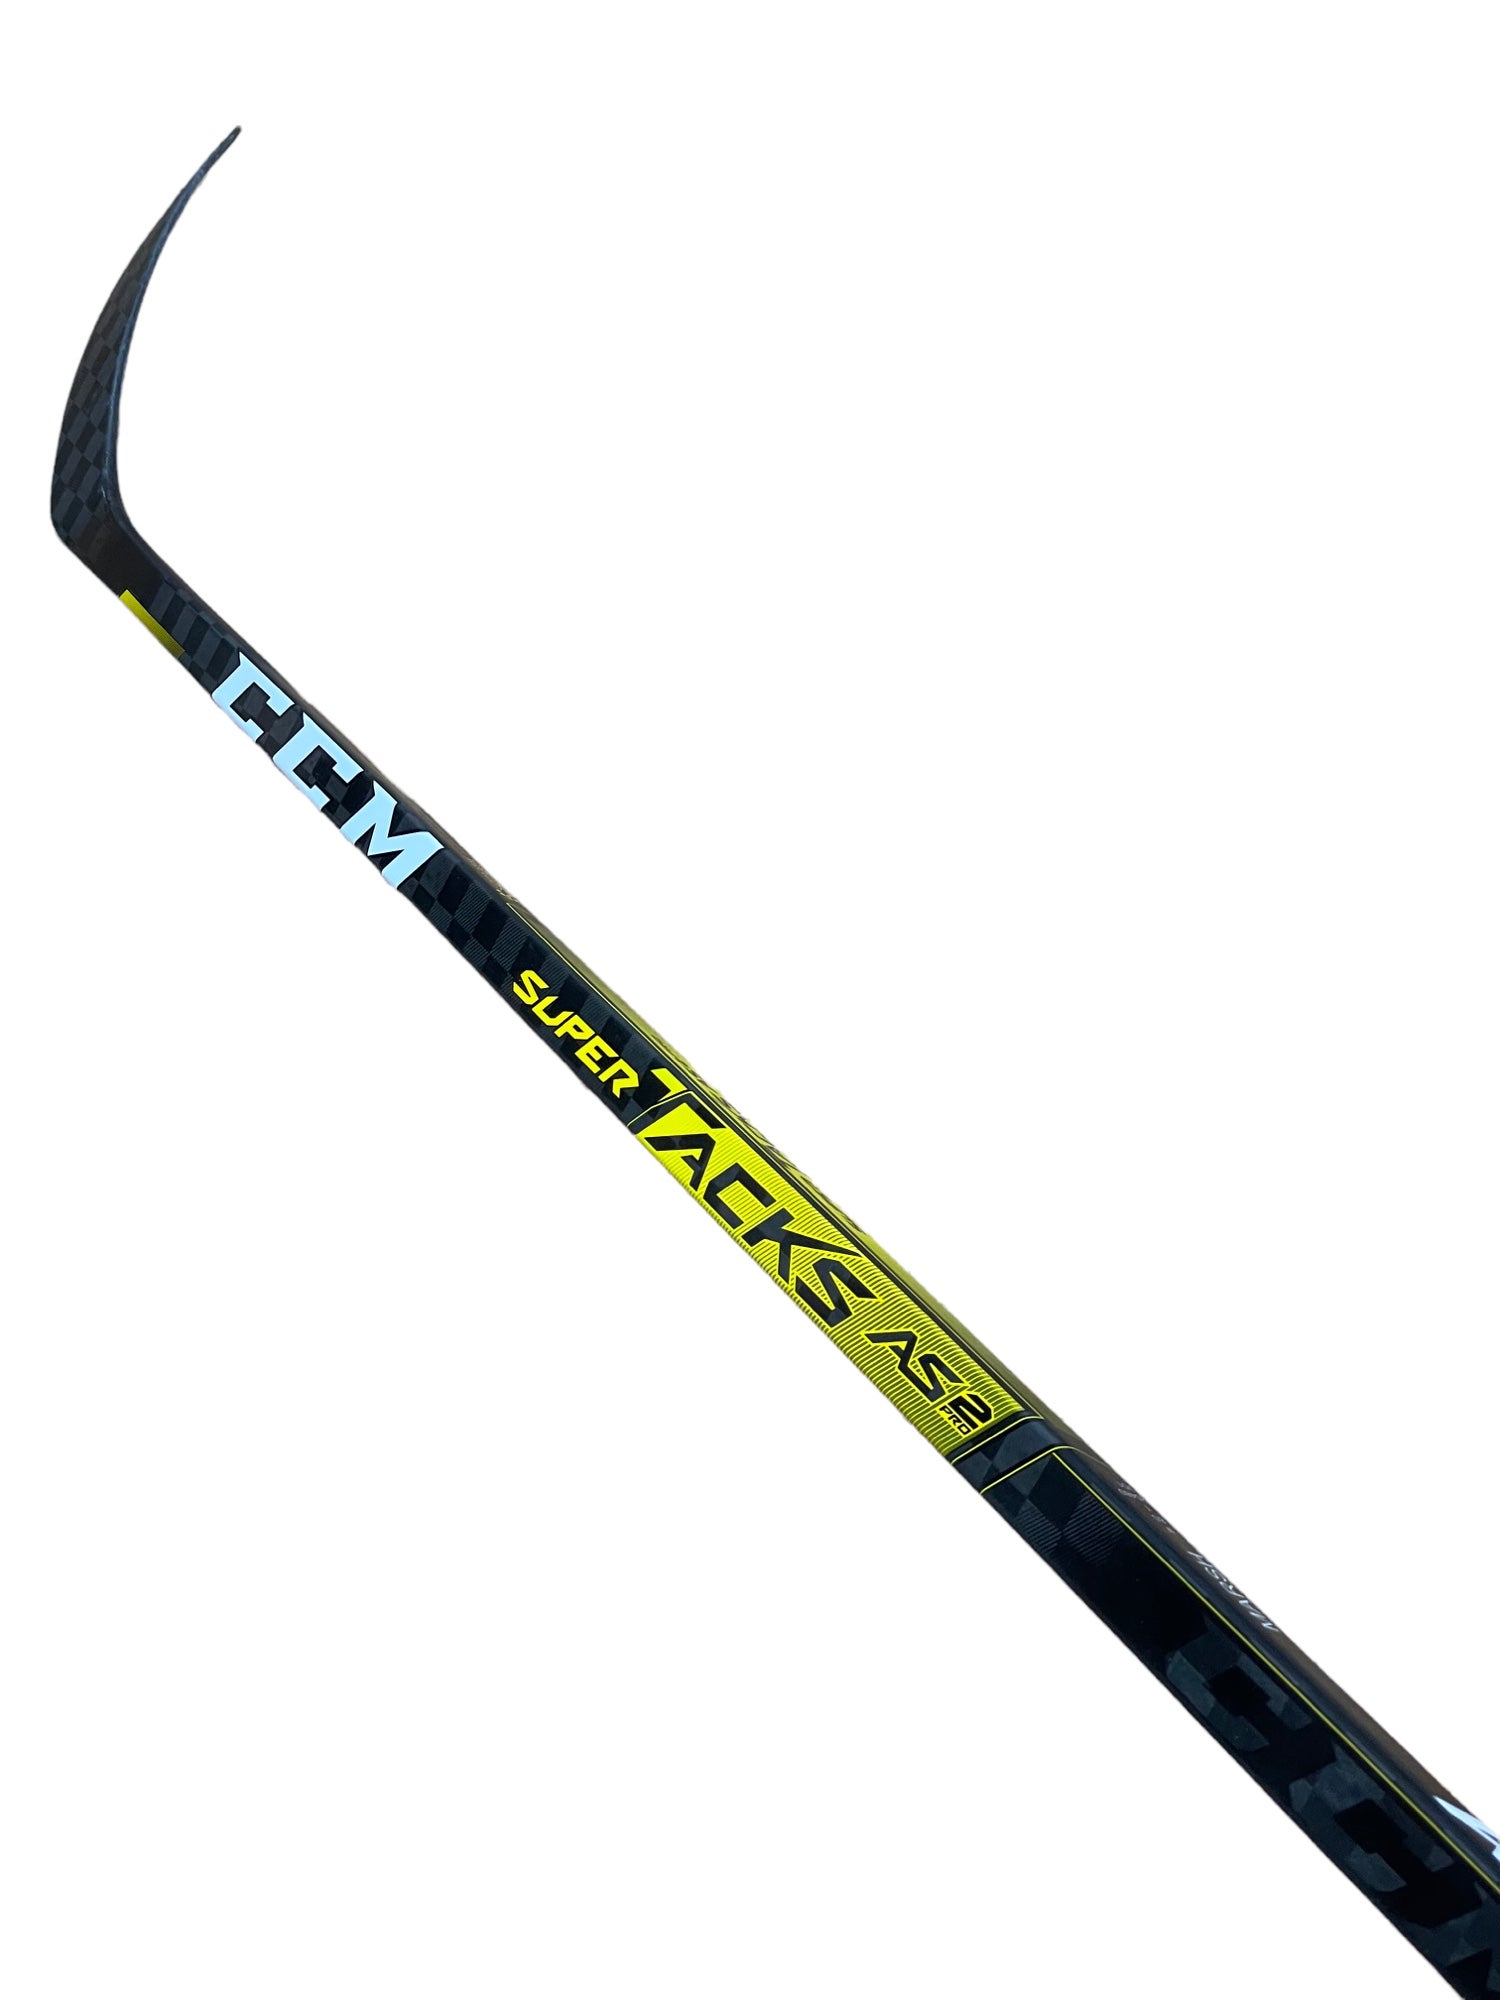 We're giving away a #ProStock CCM Super - Pro Stock Hockey